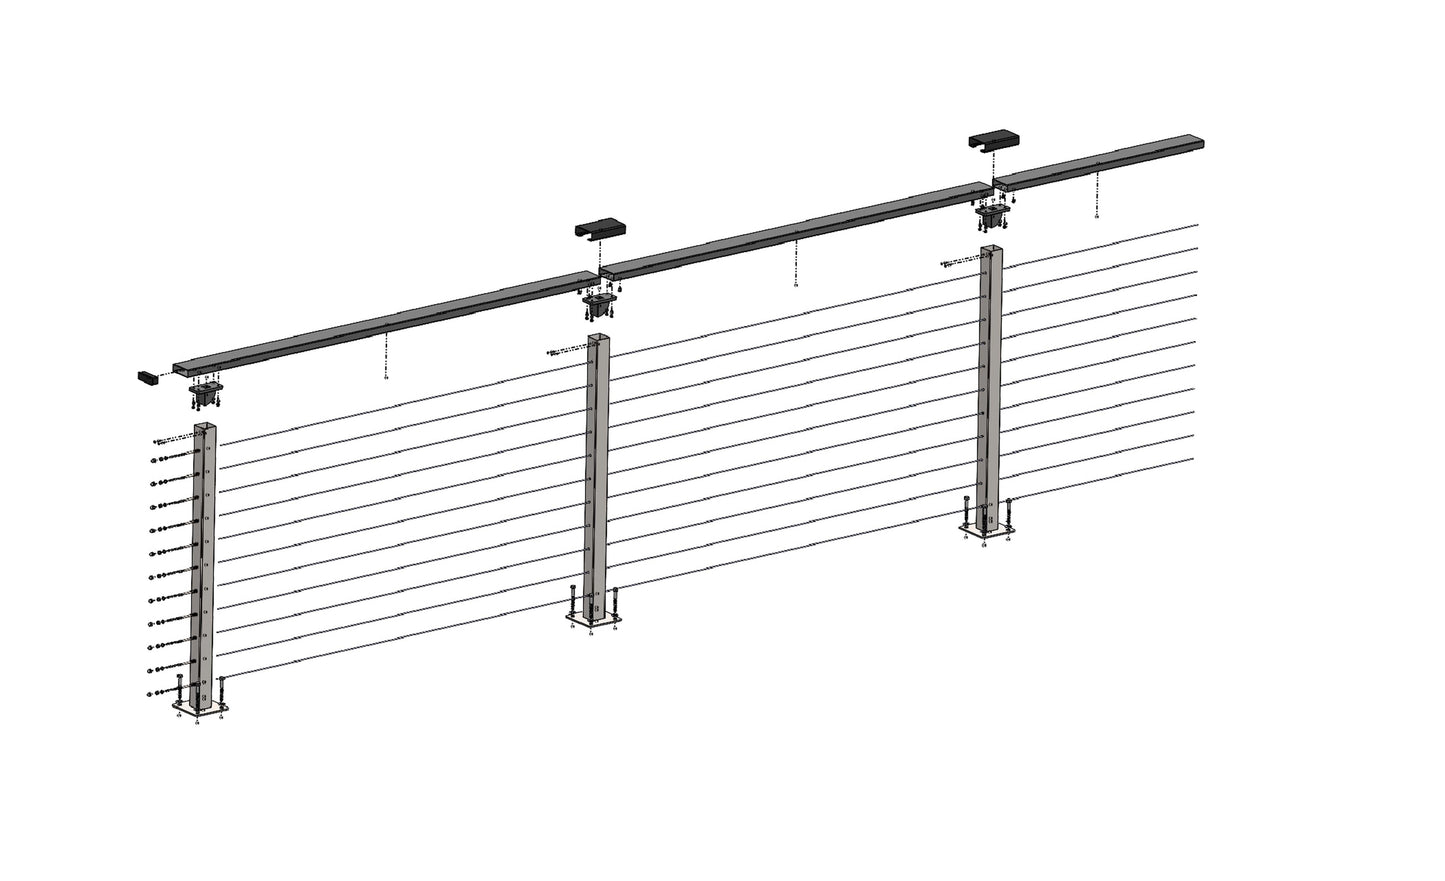 41 ft. x 42 in. White Deck Cable Railing, Base Mount